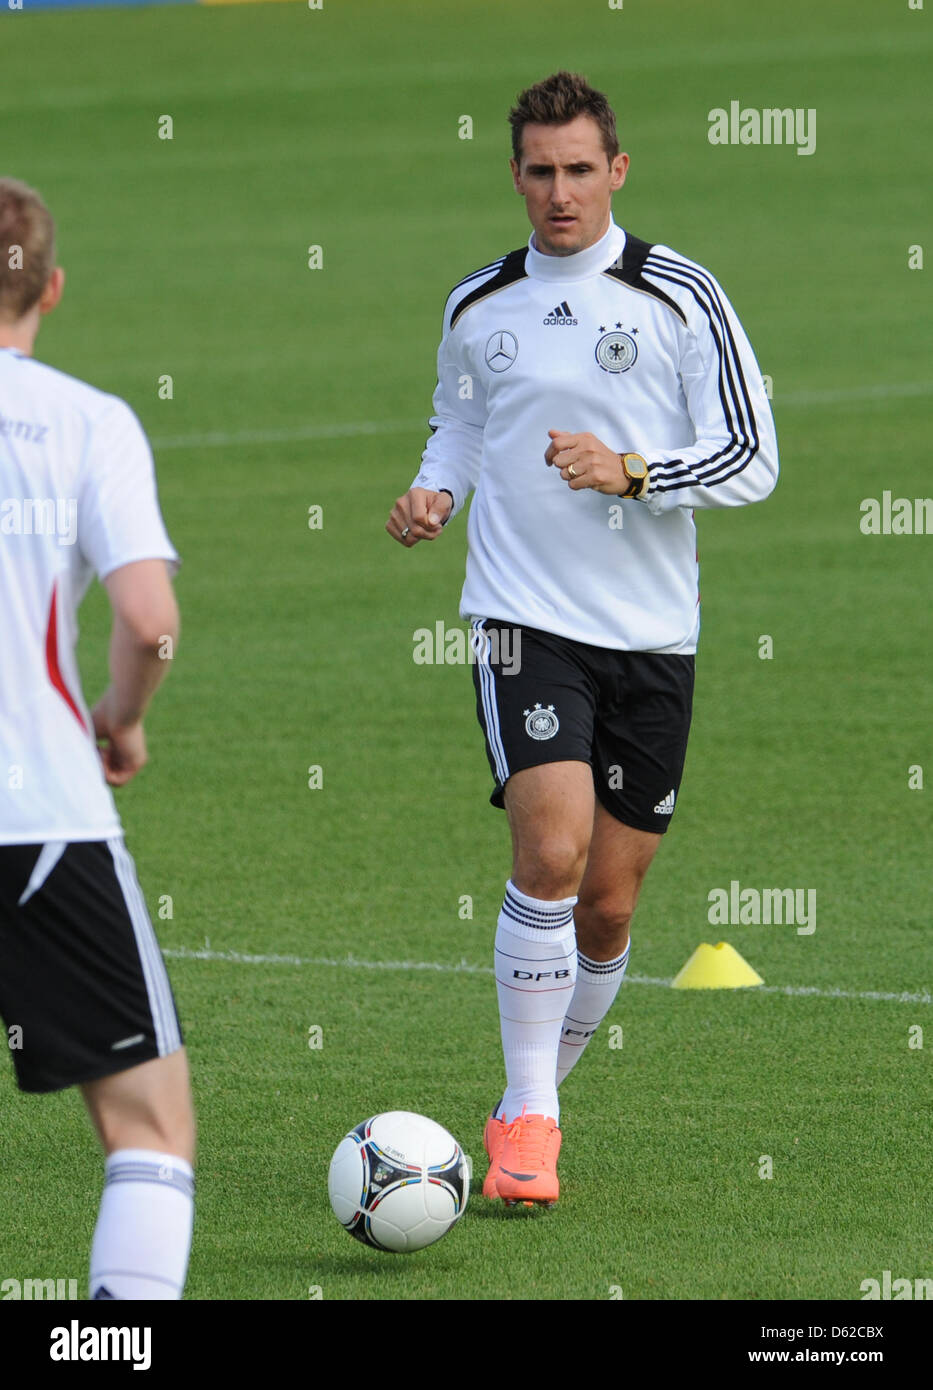 German national soccer player Miroslav Klose practices on a pitch near Callian, France, 18 May 2012. The German national team is preparing for the Euro 2012 in southern France until 20 May 2012. Photo: ANDREAS GEBERT Stock Photo